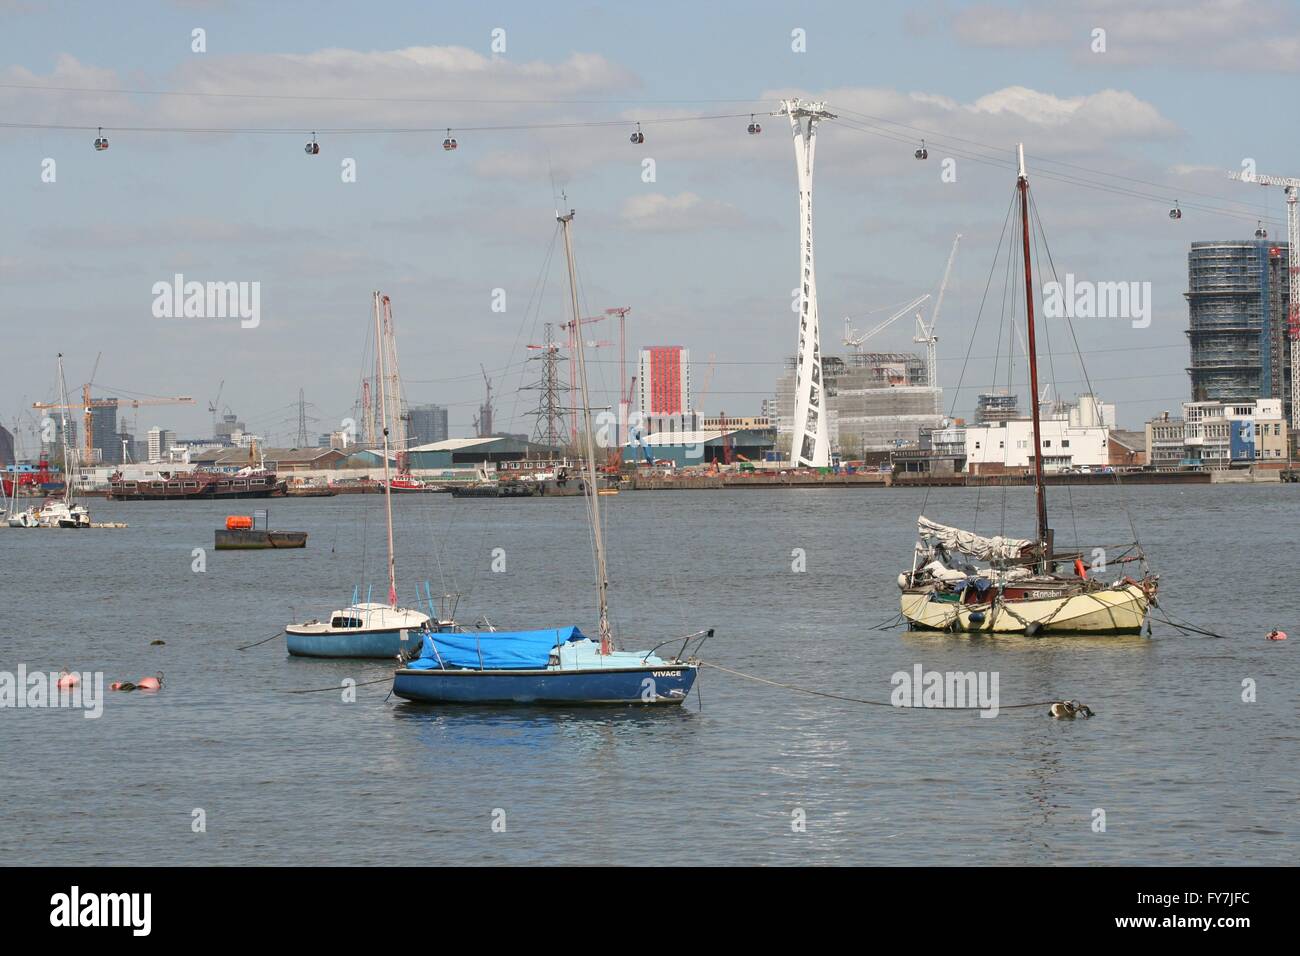 Boats moored on the Thames Stock Photo